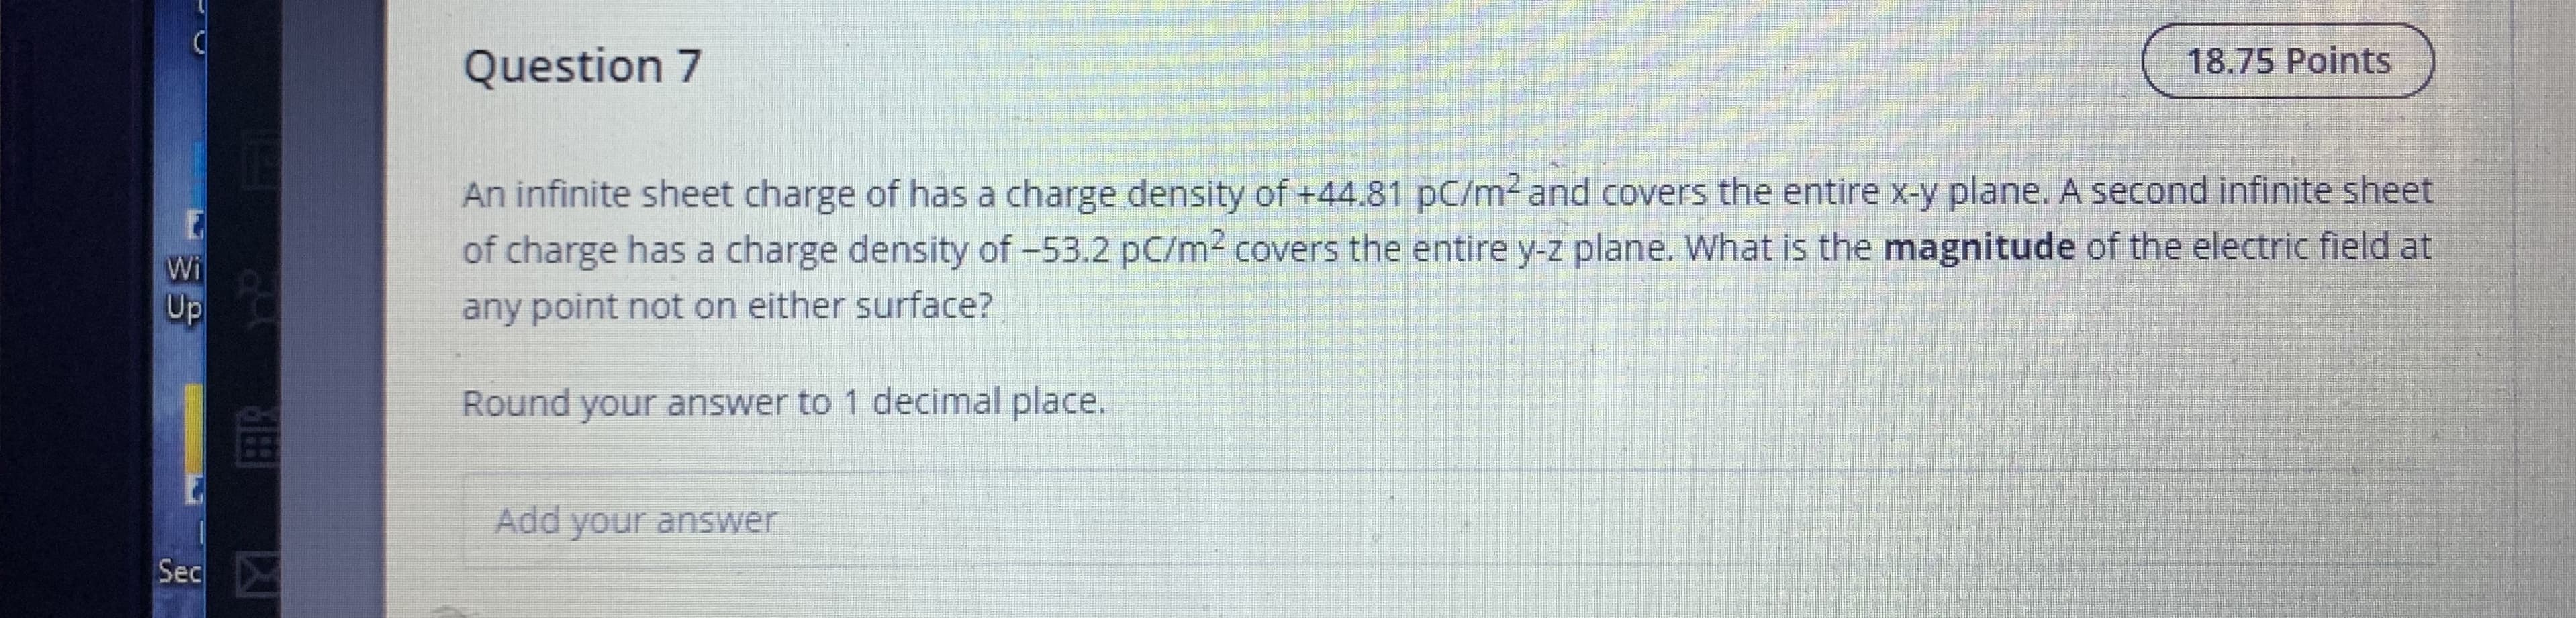 An infinite sheet charge of has a charge density of +44.81 pC/m2 and covers the entire x-y plane. A second infinite sheet
of charge has a charge density of -53.2 pC/m2 covers the entire y-z plane. What is the magnitude of the electric field at
any point not on either surface?
